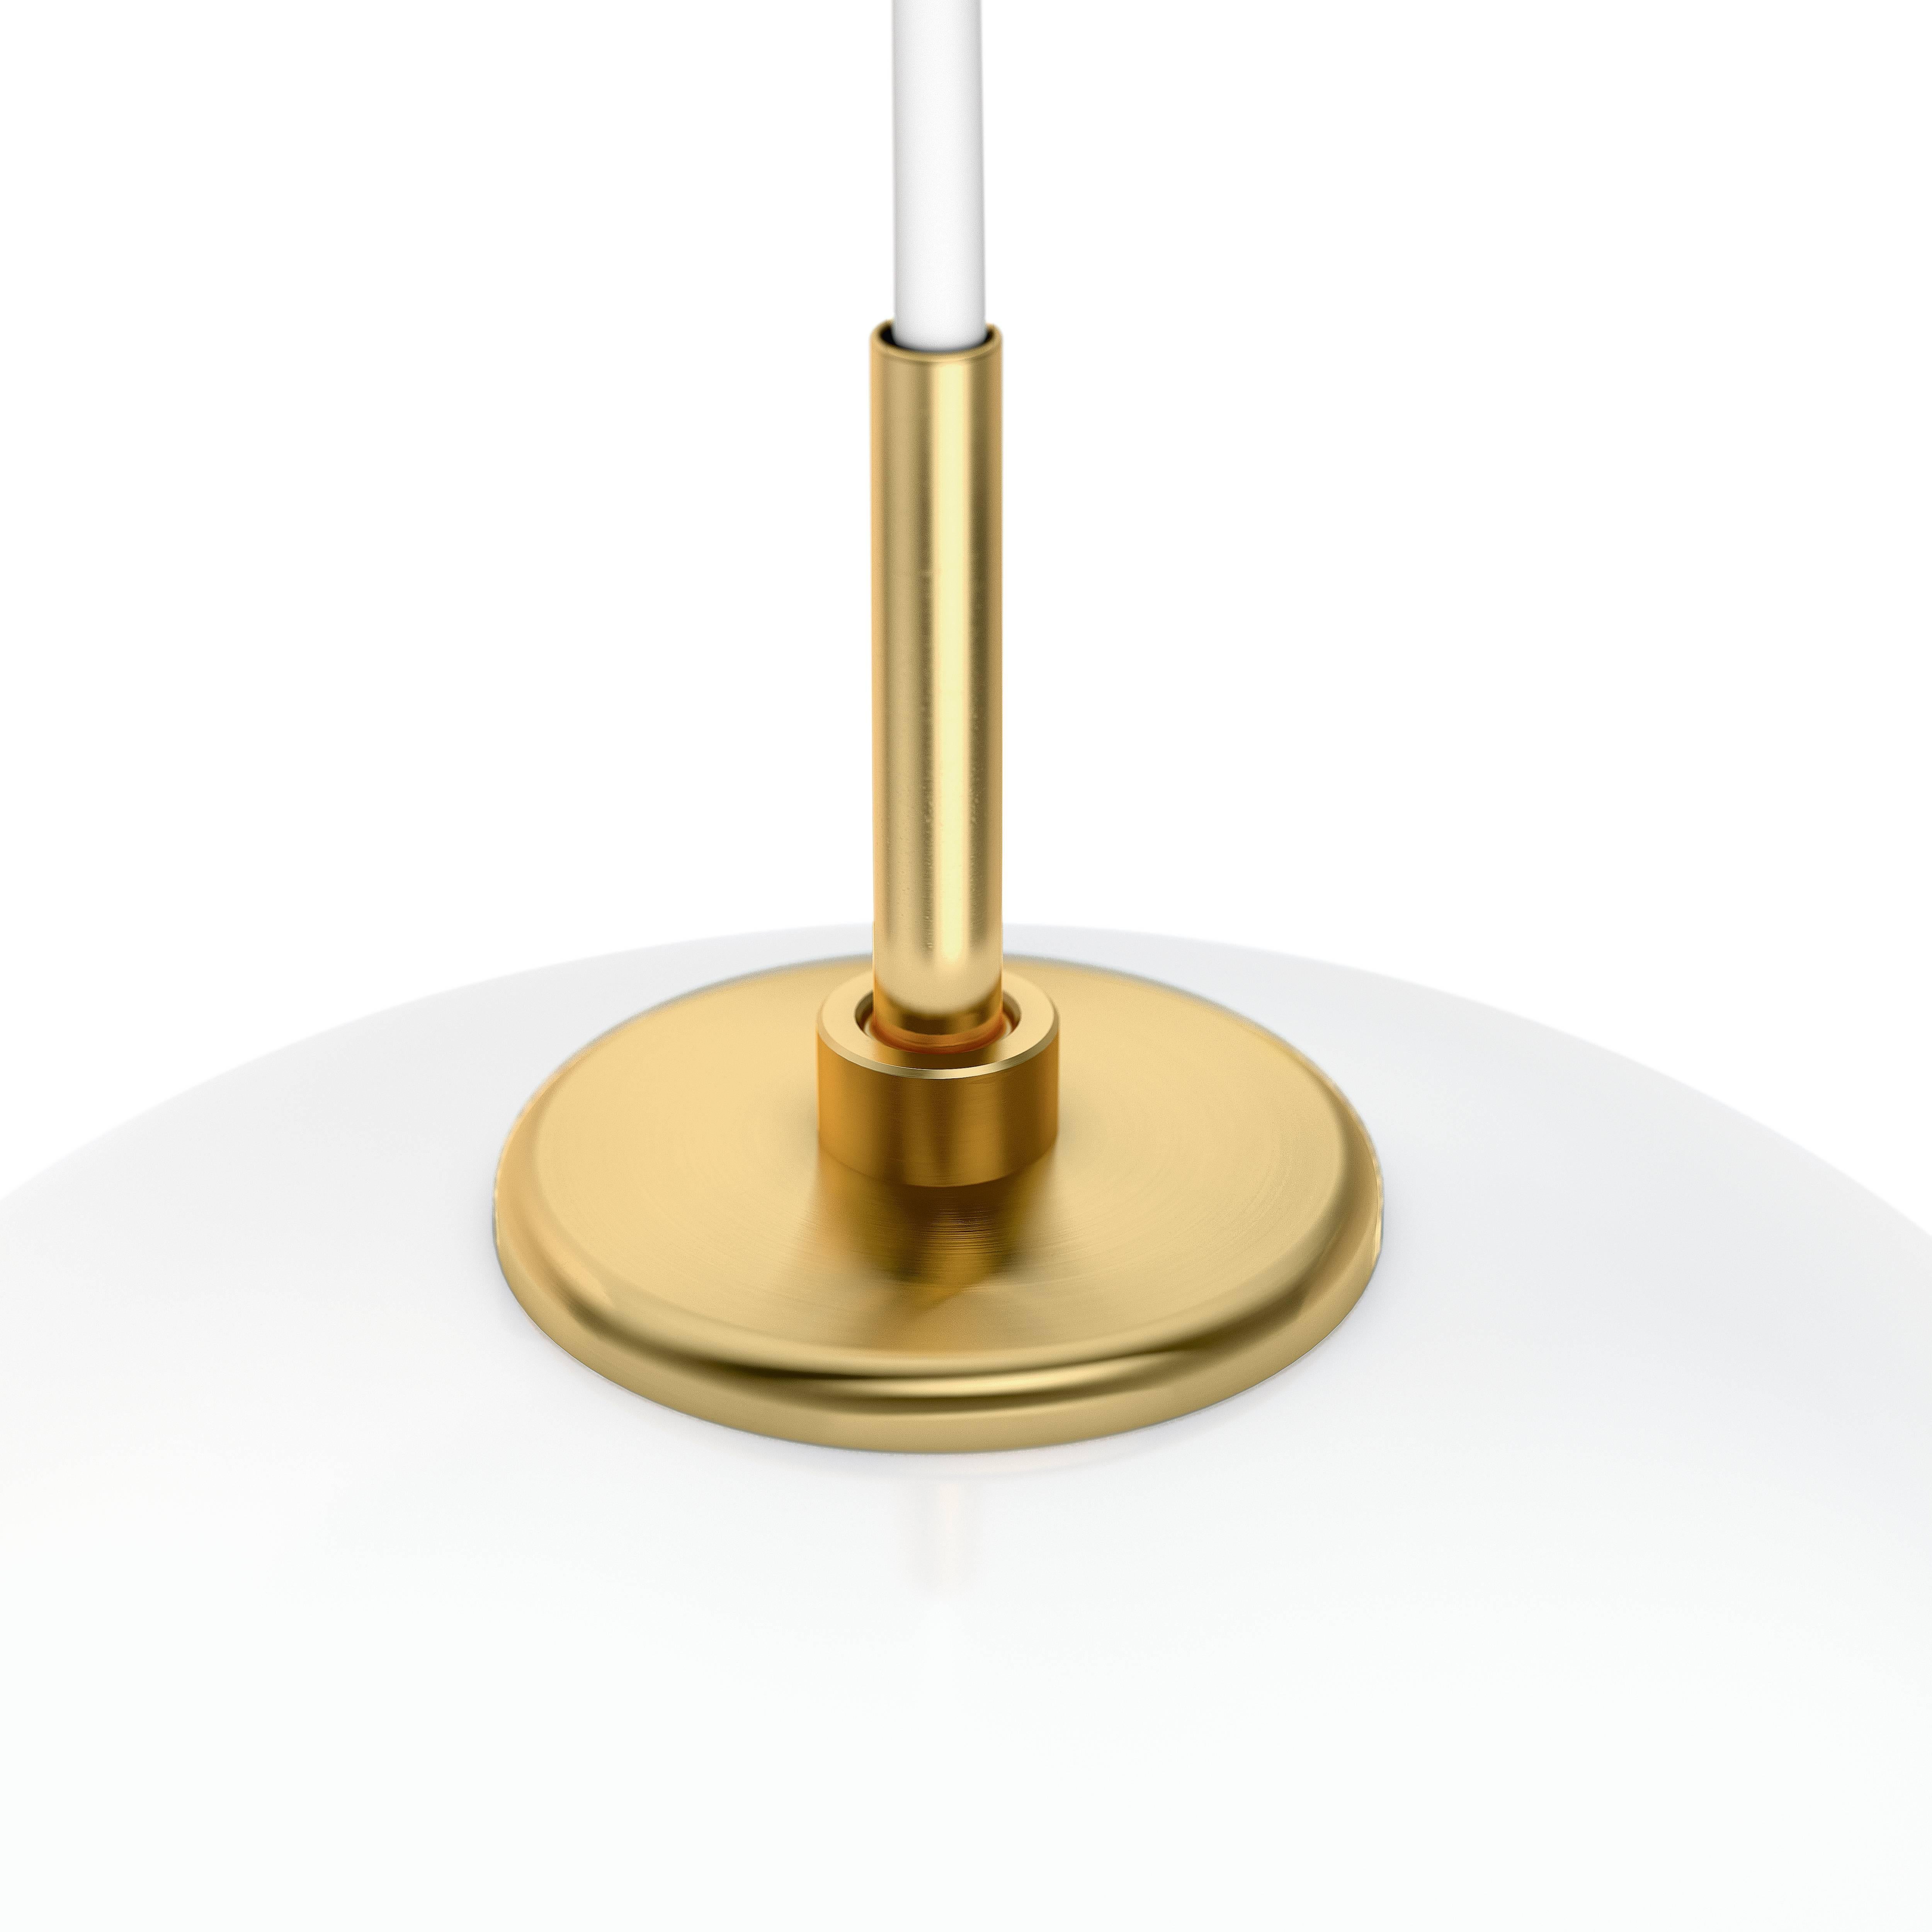 Vilhelm Lauritzen VL45 'Radiohus' pendants for Louis Poulsen. Executed in hand blown glossy white opal glass, brushed brass pendant tube, white metal canopy and white cord. This listing is for the large size pendants. Also available in small 12.9